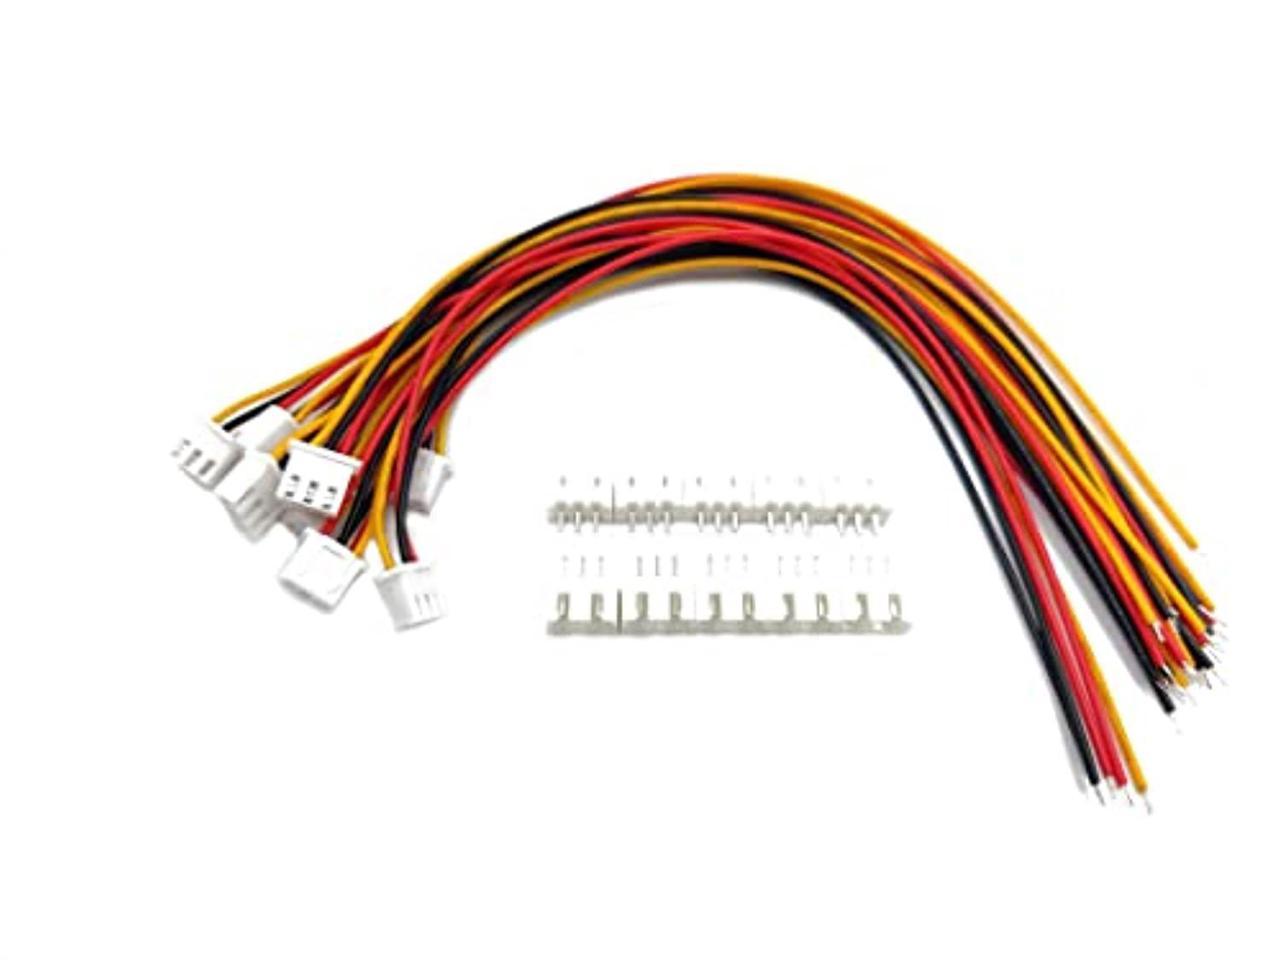 JST-XH 2.5mm 9-Pin Female Connector Adapter with wire & Male connector x 5 SETS 